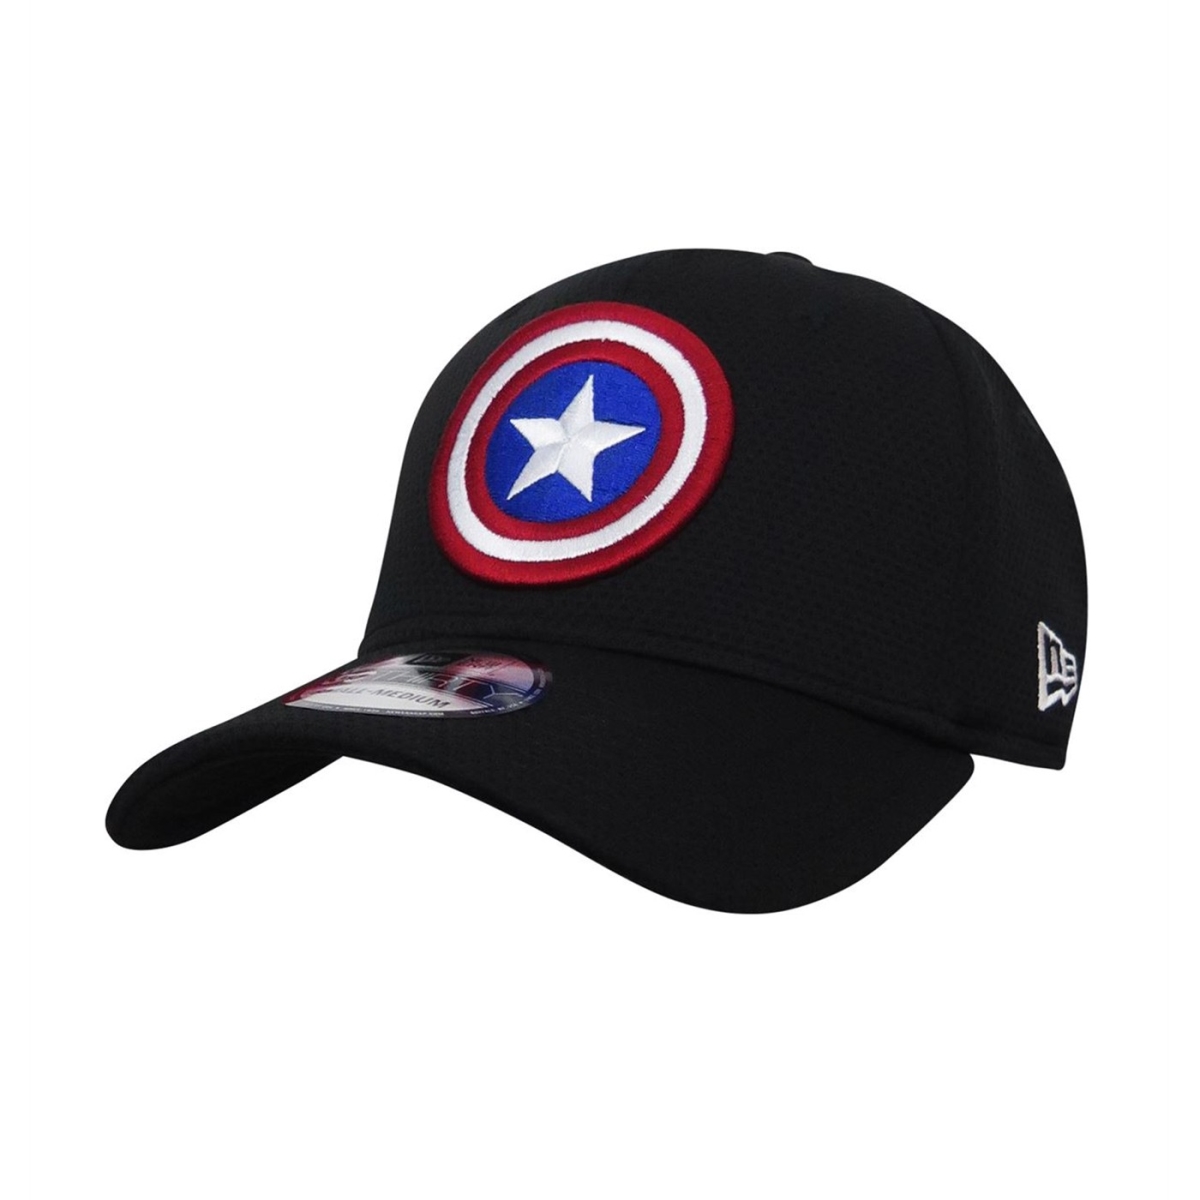 Picture of Captain America capcapshldblk39-l-x-Large-XLarge Captain America Shield Black 39 Thirty Fitted Hat - Large & Extra Large